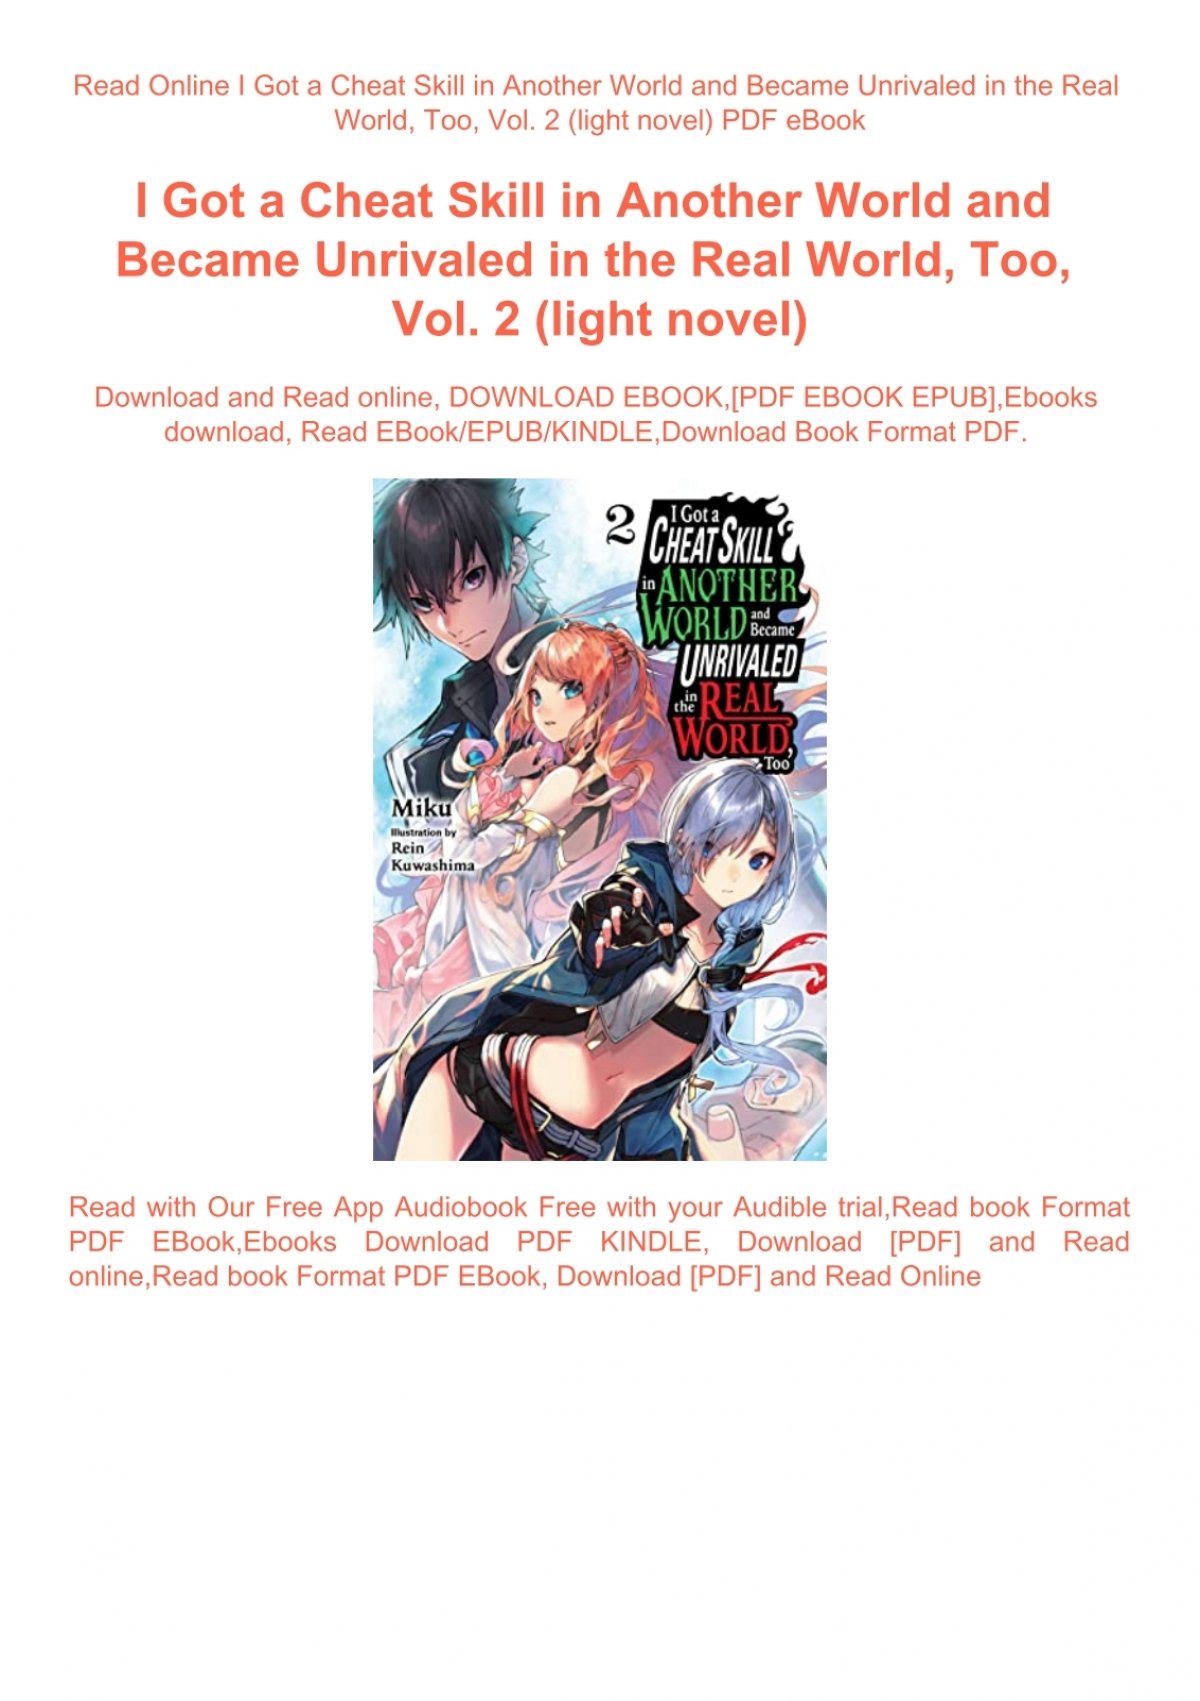 I Got a Cheat Skill in Another World and Became Unrivaled in The Real World,  Too, Vol. 1 (manga) - ePub - Compra ebook na